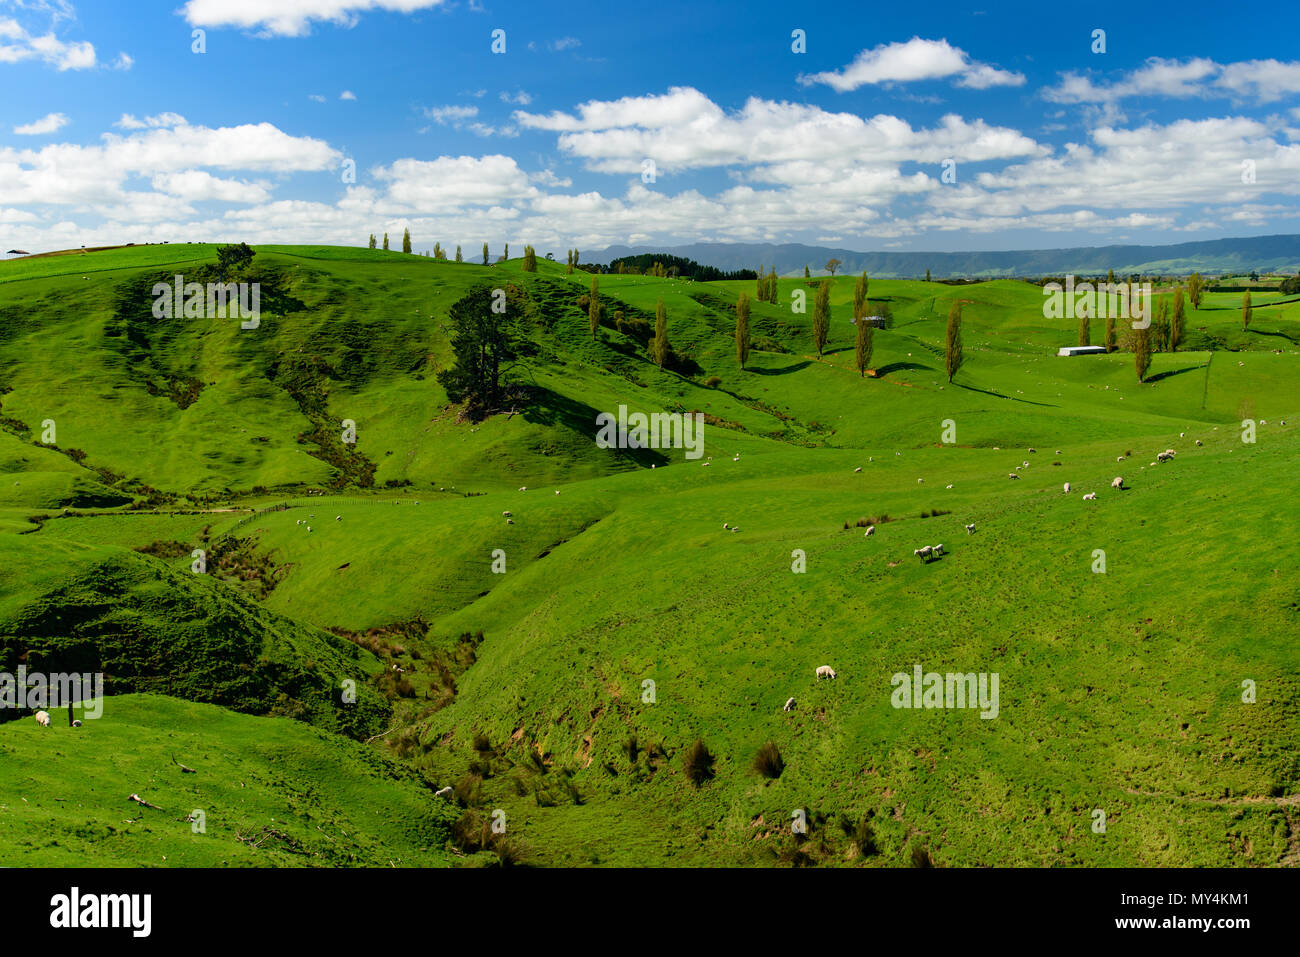 Sheep on green hill with blue sky, view of South Island, New Zealand Stock Photo